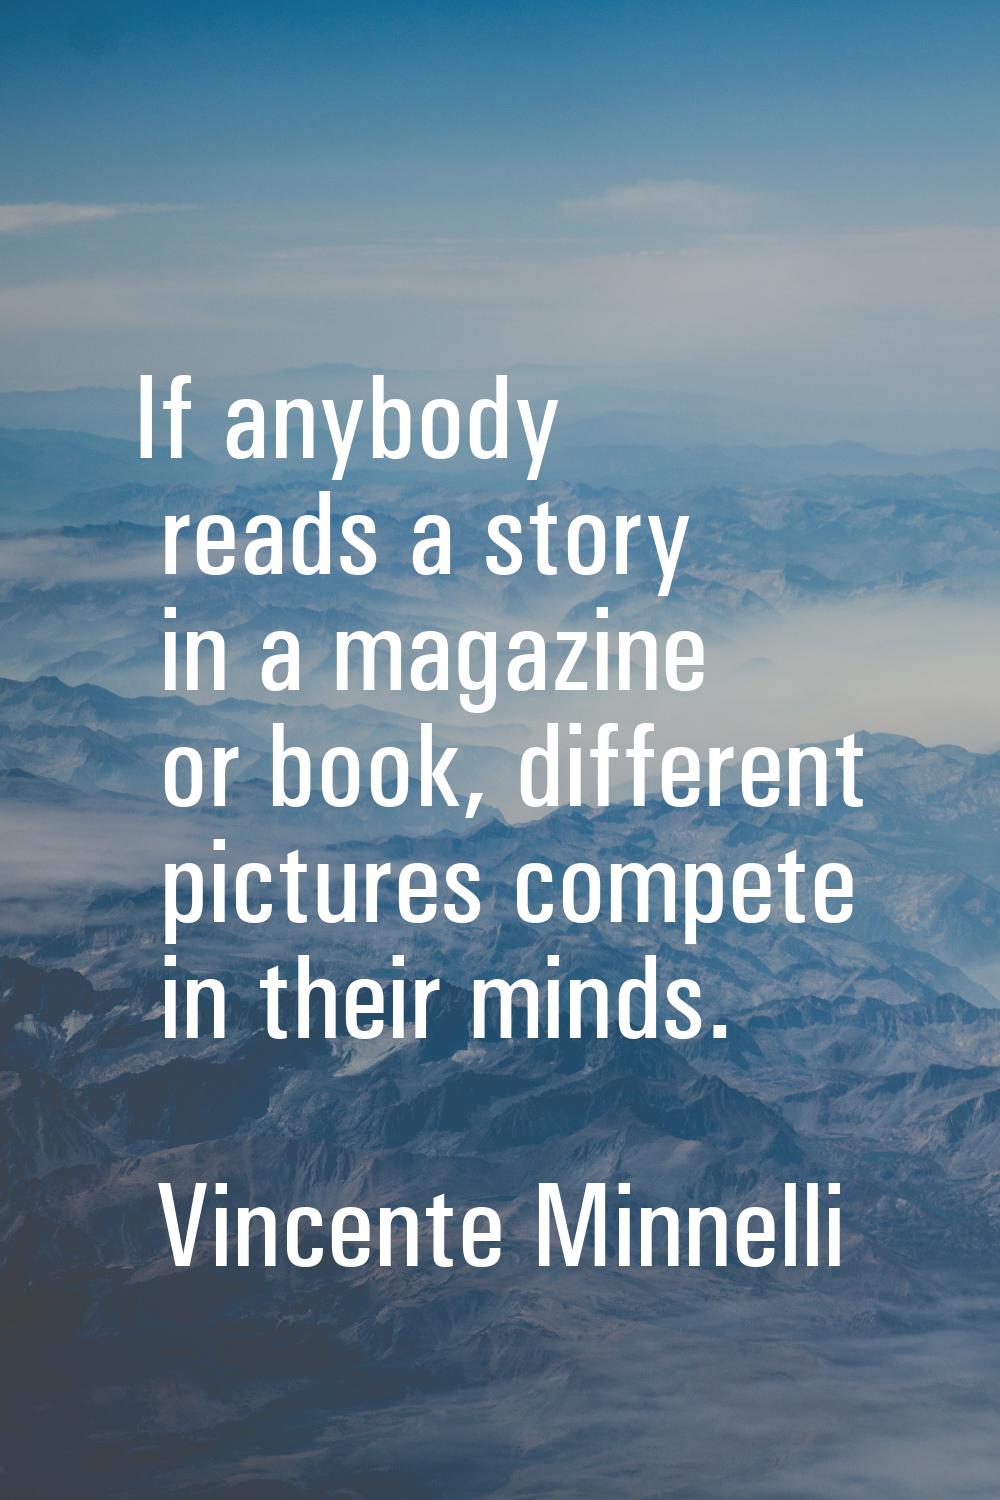 If anybody reads a story in a magazine or book, different pictures compete in their minds.